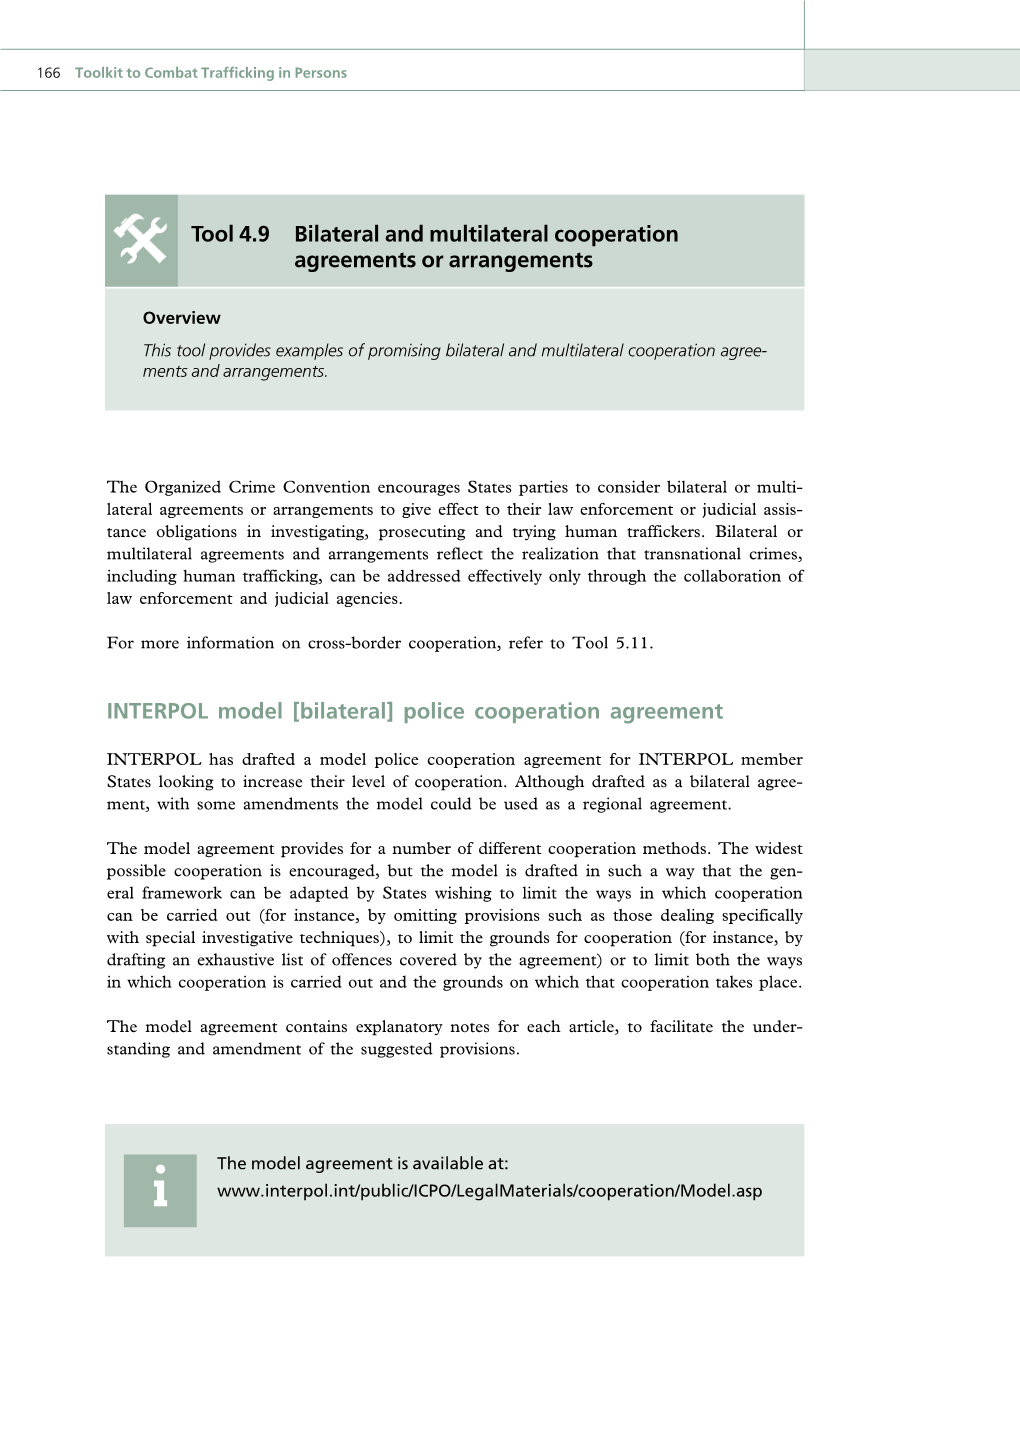 Tool 4.9 Bilateral and Multilateral Cooperation Agreements Or Arrangements